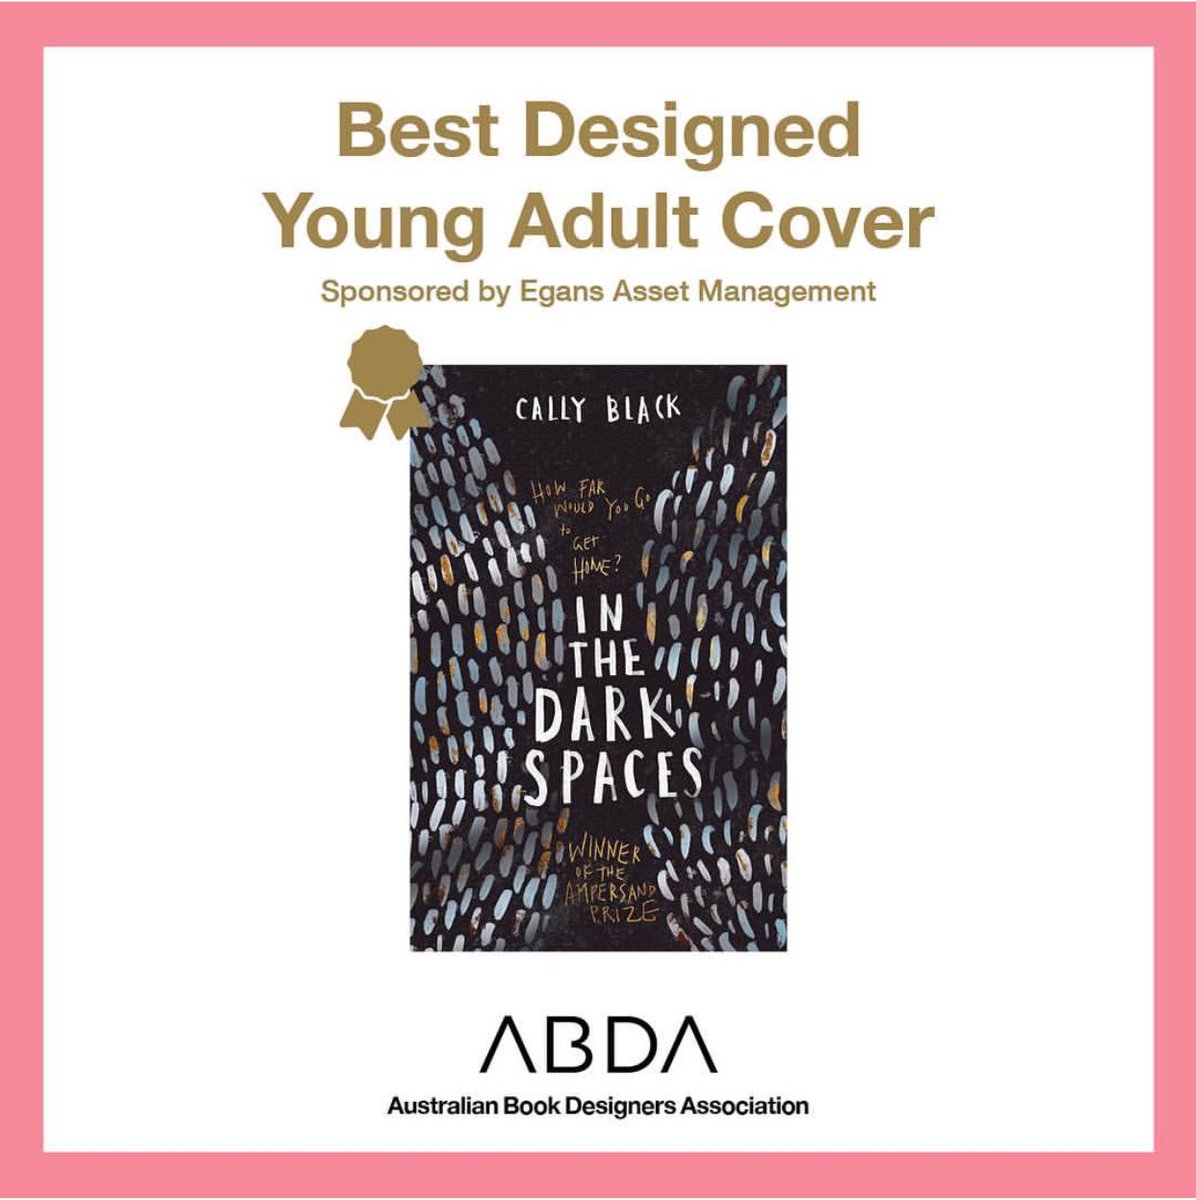 Astred On Twitter Winner Winner Chicken Dinner I Won Best Designed Young Adult Cover For In The Dark Spaces Last Night At Theabda Australian Book Design Awards Ecstatic That The Blood Sweat